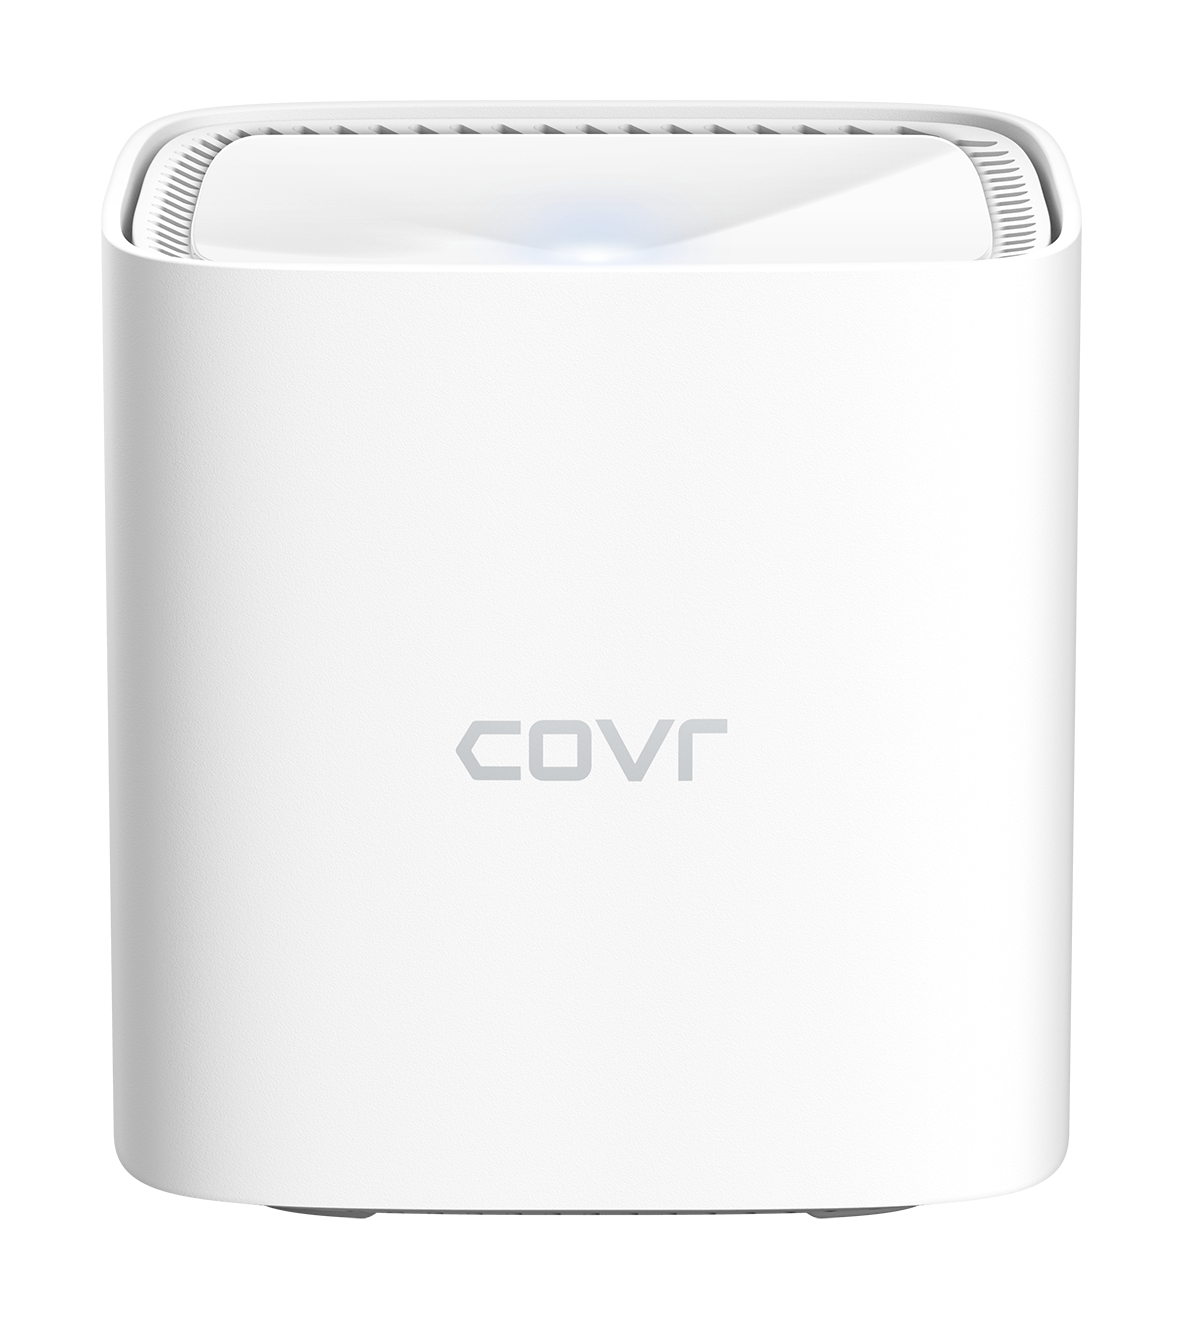 COVR-1100 AC1200 Dual Band Whole Home Mesh Wi-Fi System - front